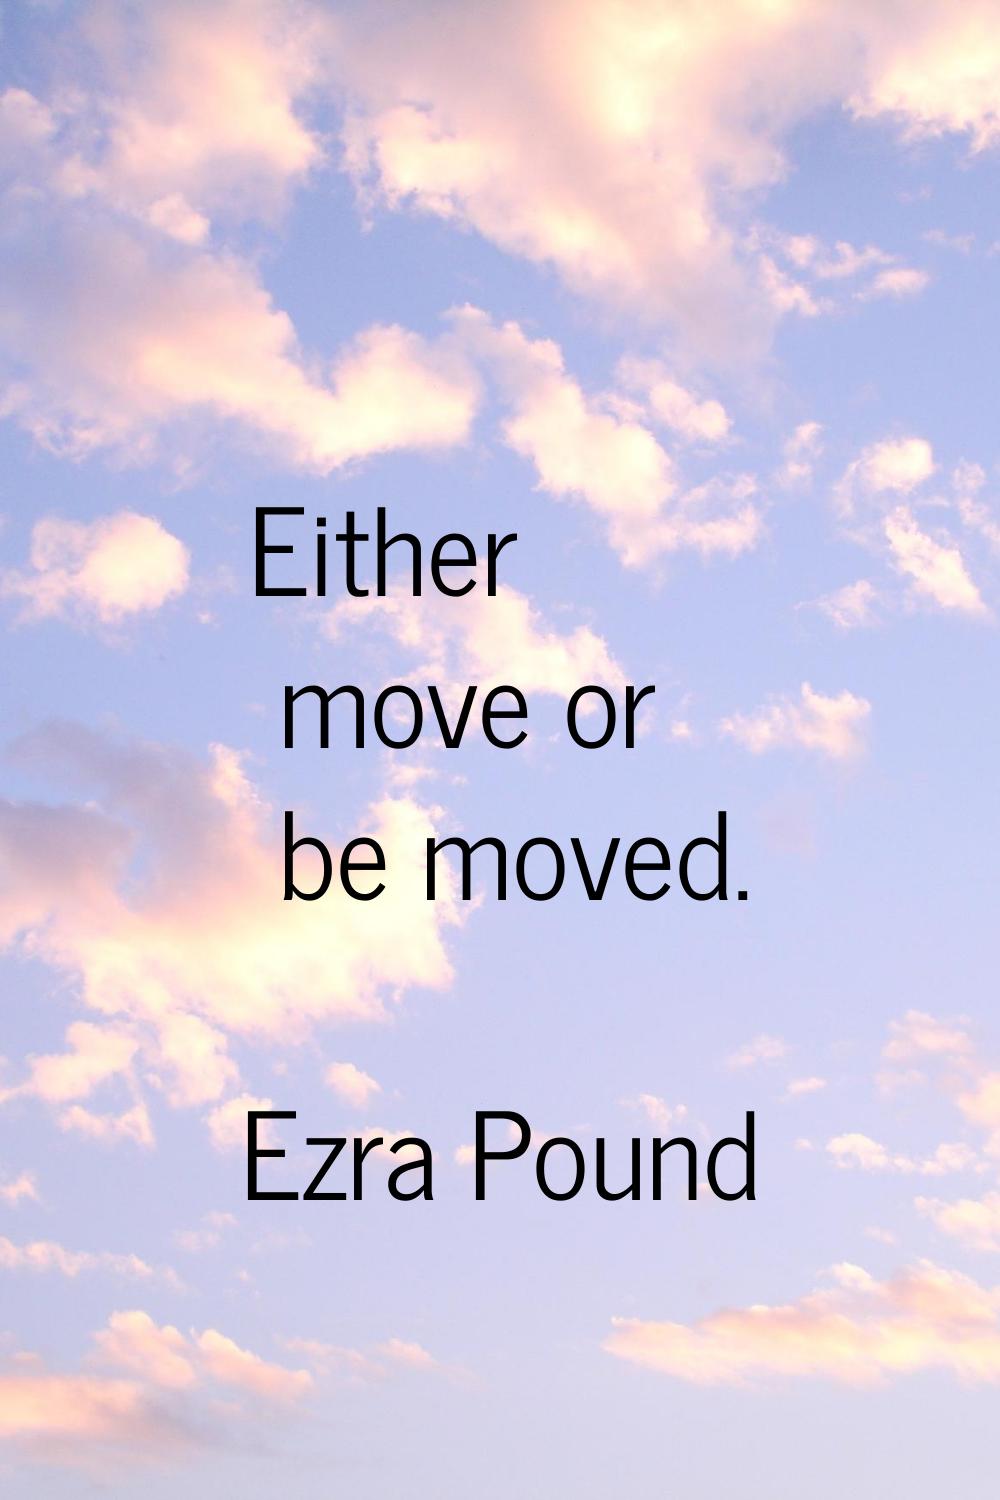 Either move or be moved.